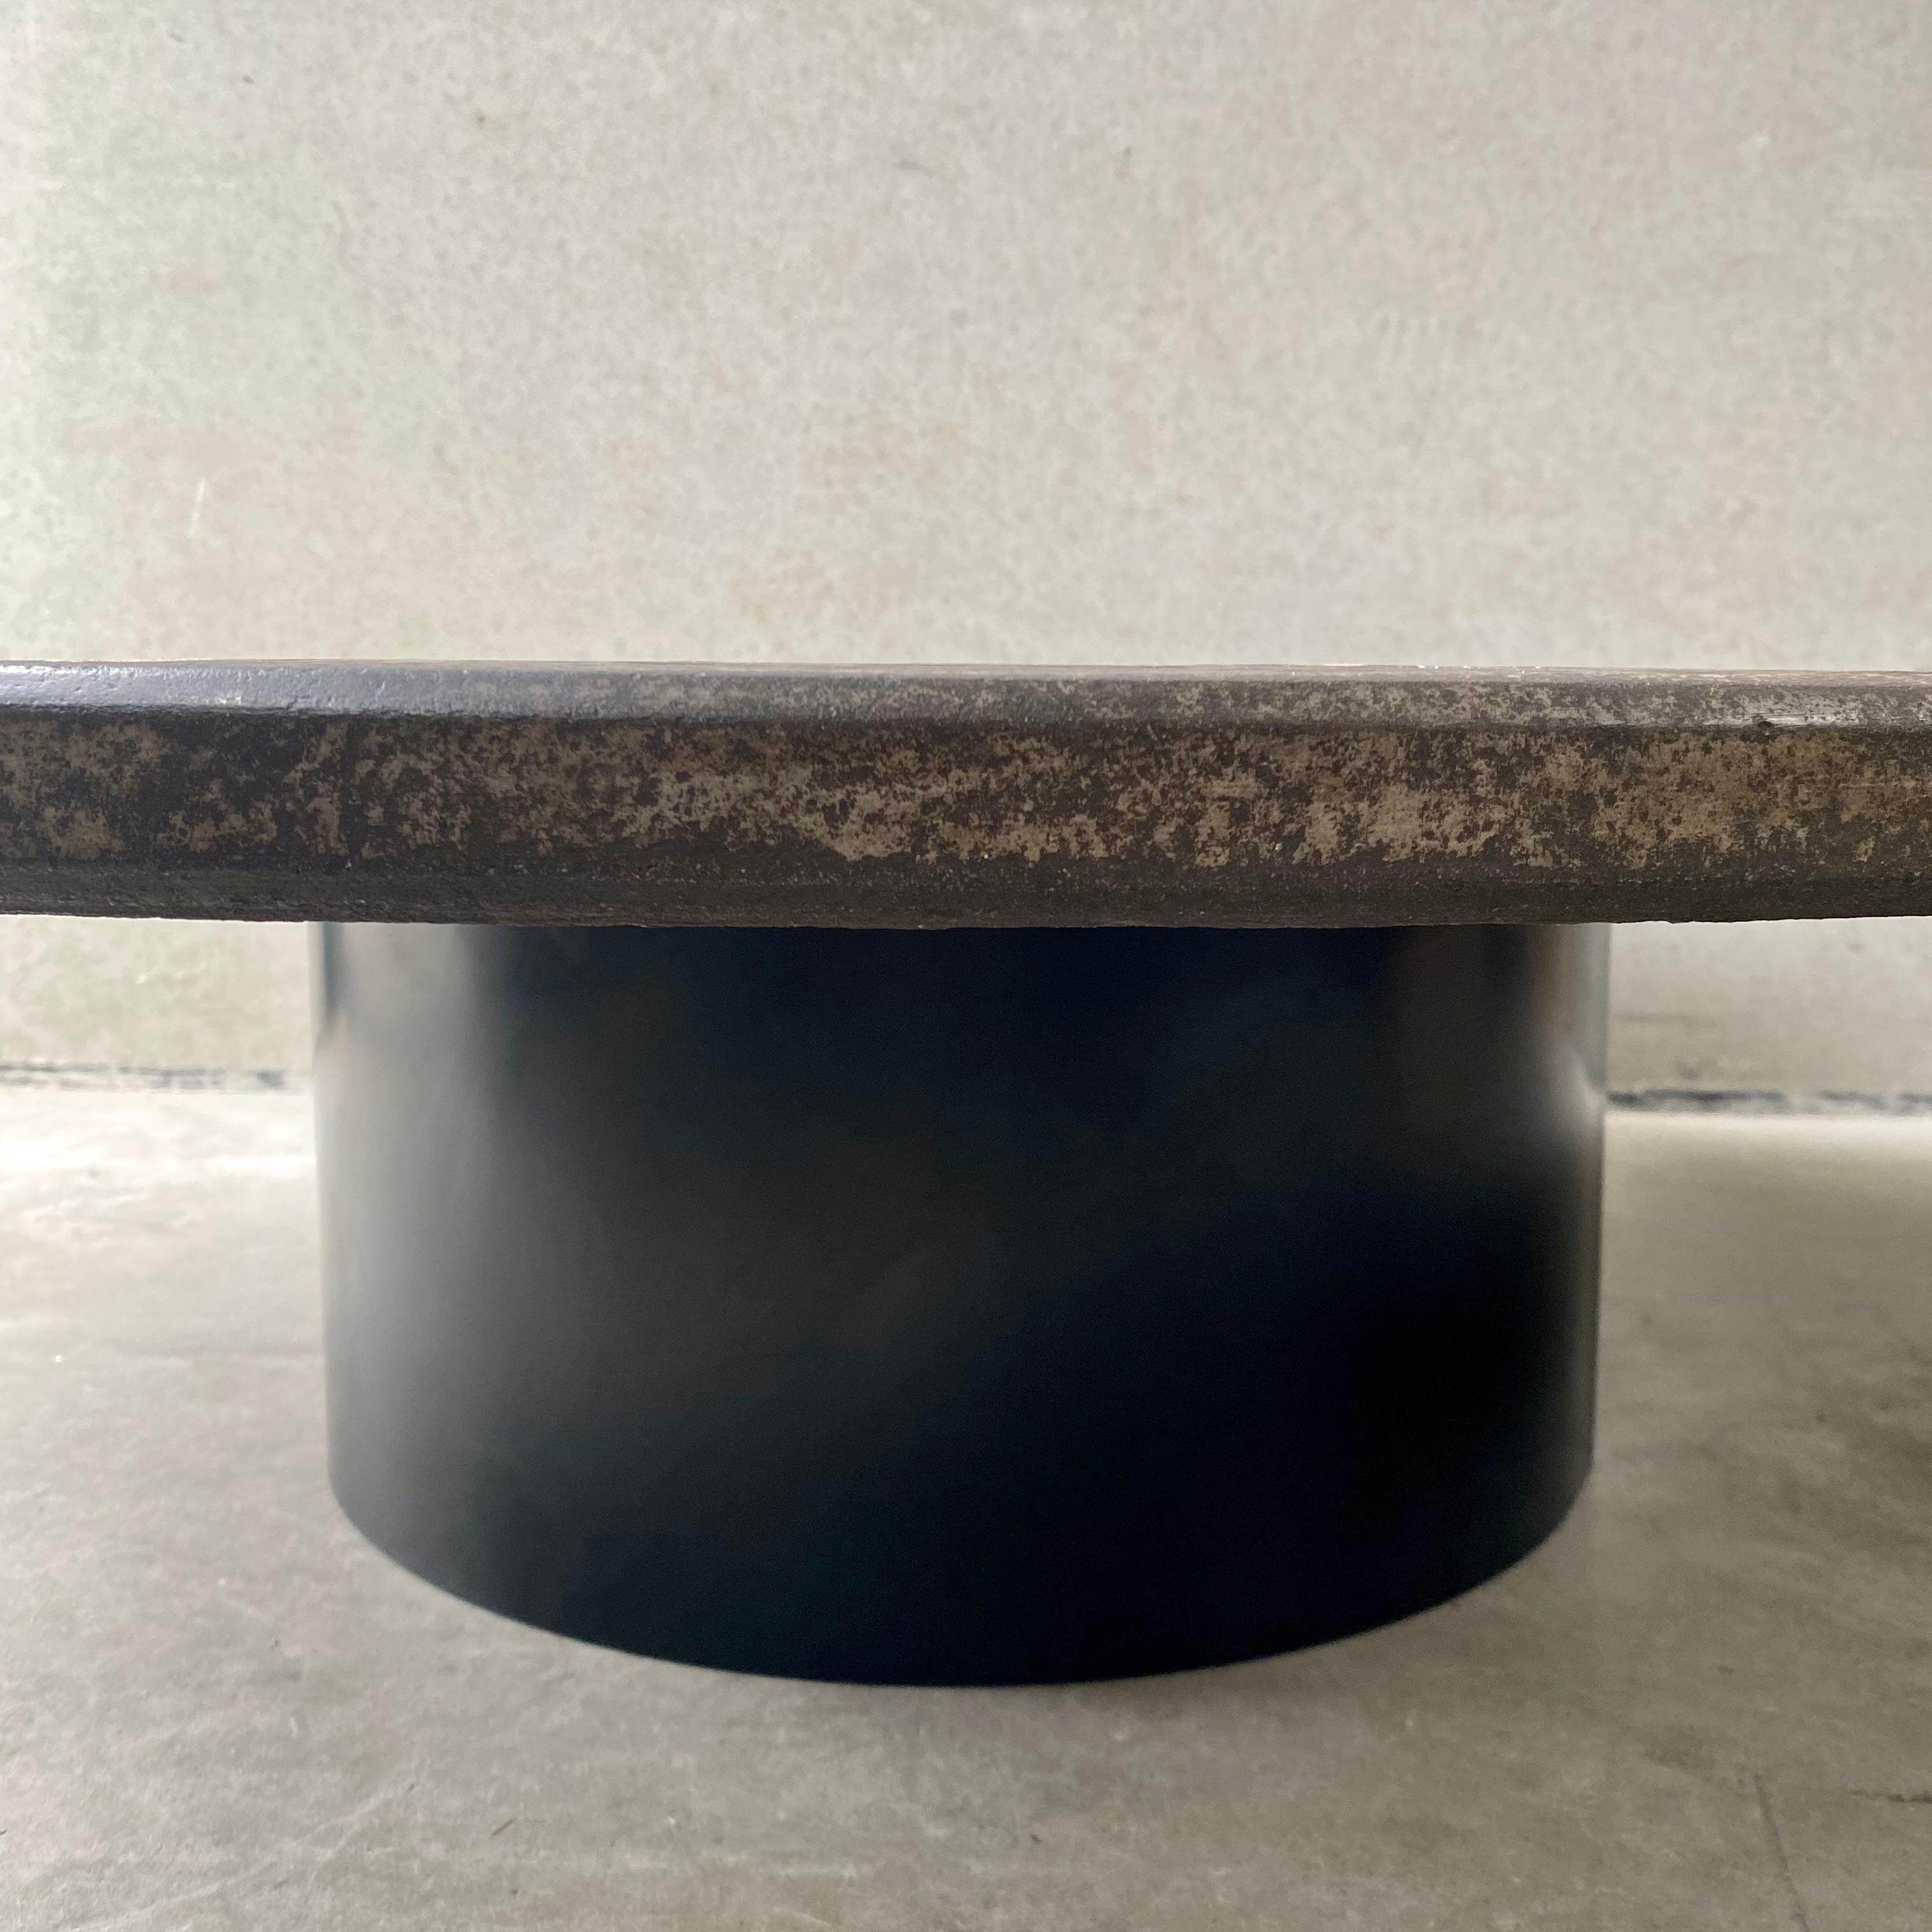 Brutalist Art Stone Round Coffee Table by Sculptor Paul Kingma Netherlands, 1985 For Sale 5